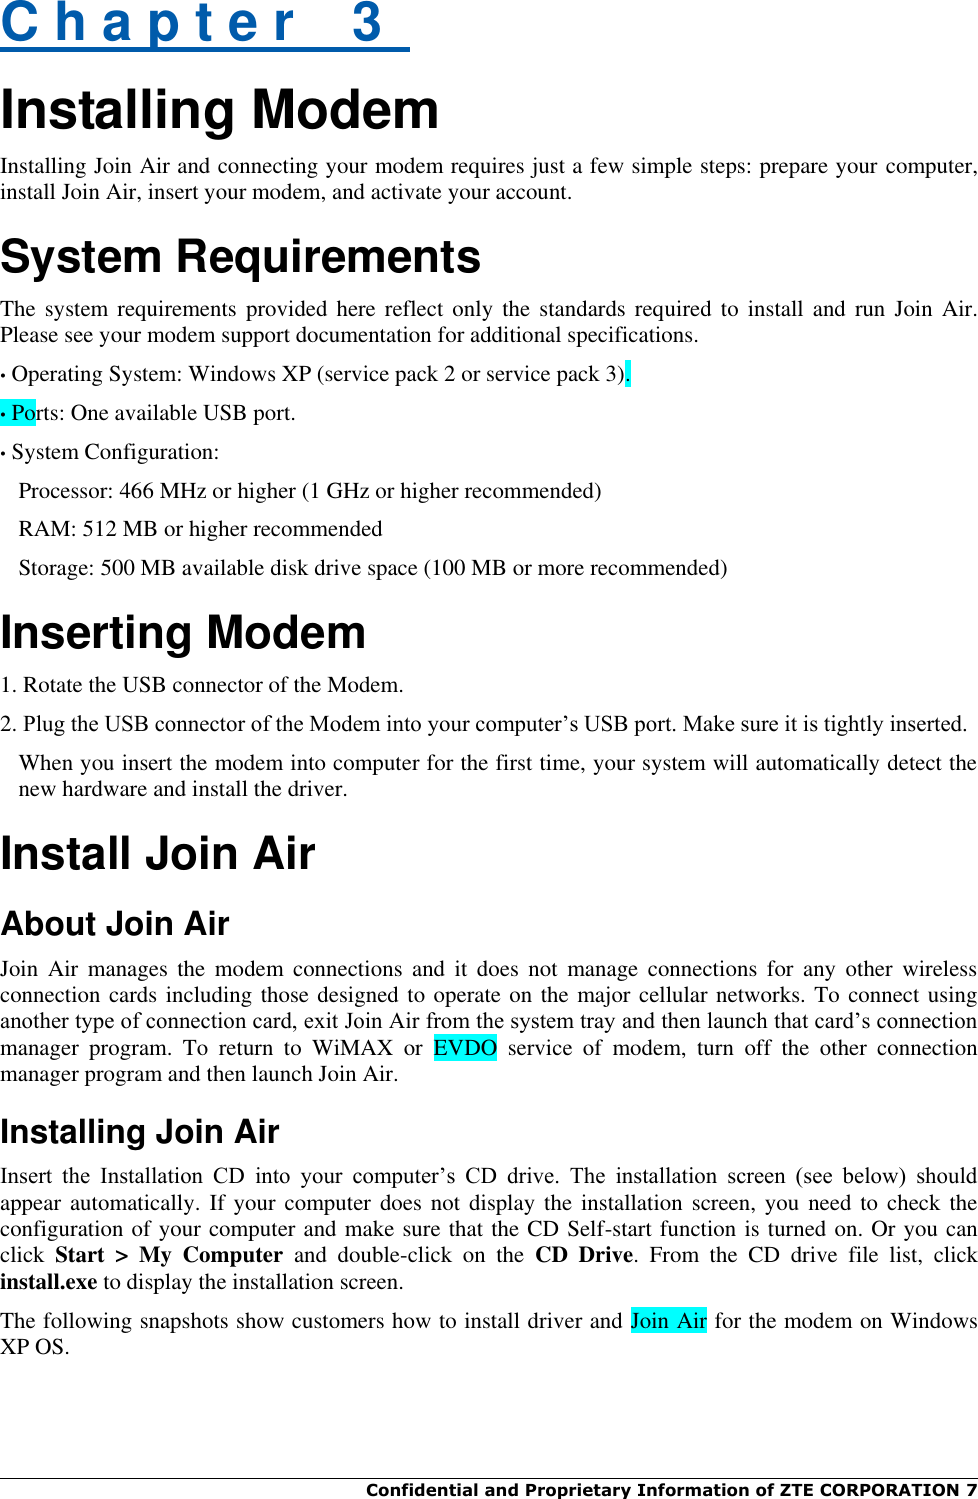  Confidential and Proprietary Information of ZTE CORPORATION 7    C h a p t e r    3   Installing Modem Installing Join Air and connecting your modem requires just a few simple steps: prepare your computer, install Join Air, insert your modem, and activate your account. System Requirements The system requirements provided here reflect only  the standards required  to  install  and  run  Join  Air. Please see your modem support documentation for additional specifications. • Operating System: Windows XP (service pack 2 or service pack 3). • Ports: One available USB port. • System Configuration: Processor: 466 MHz or higher (1 GHz or higher recommended) RAM: 512 MB or higher recommended Storage: 500 MB available disk drive space (100 MB or more recommended) Inserting Modem 1. Rotate the USB connector of the Modem. 2. Plug the USB connector of the Modem into your computer‟s USB port. Make sure it is tightly inserted. When you insert the modem into computer for the first time, your system will automatically detect the new hardware and install the driver. Install Join Air About Join Air Join  Air  manages  the  modem  connections  and  it does  not  manage  connections  for any  other  wireless connection cards including those designed to operate on the major cellular networks. To connect using another type of connection card, exit Join Air from the system tray and then launch that card‟s connection manager  program.  To  return  to  WiMAX  or  EVDO  service  of  modem,  turn  off  the  other  connection manager program and then launch Join Air. Installing Join Air Insert  the  Installation  CD  into  your  computer‟s  CD  drive.  The  installation  screen  (see  below)  should appear automatically. If your computer  does not display the installation screen, you need  to  check the configuration of your computer and make sure that the CD Self-start function is turned on. Or you can click  Start  &gt;  My  Computer  and  double-click  on  the  CD  Drive.  From  the  CD  drive  file  list,  click install.exe to display the installation screen. The following snapshots show customers how to install driver and Join Air for the modem on Windows XP OS. 